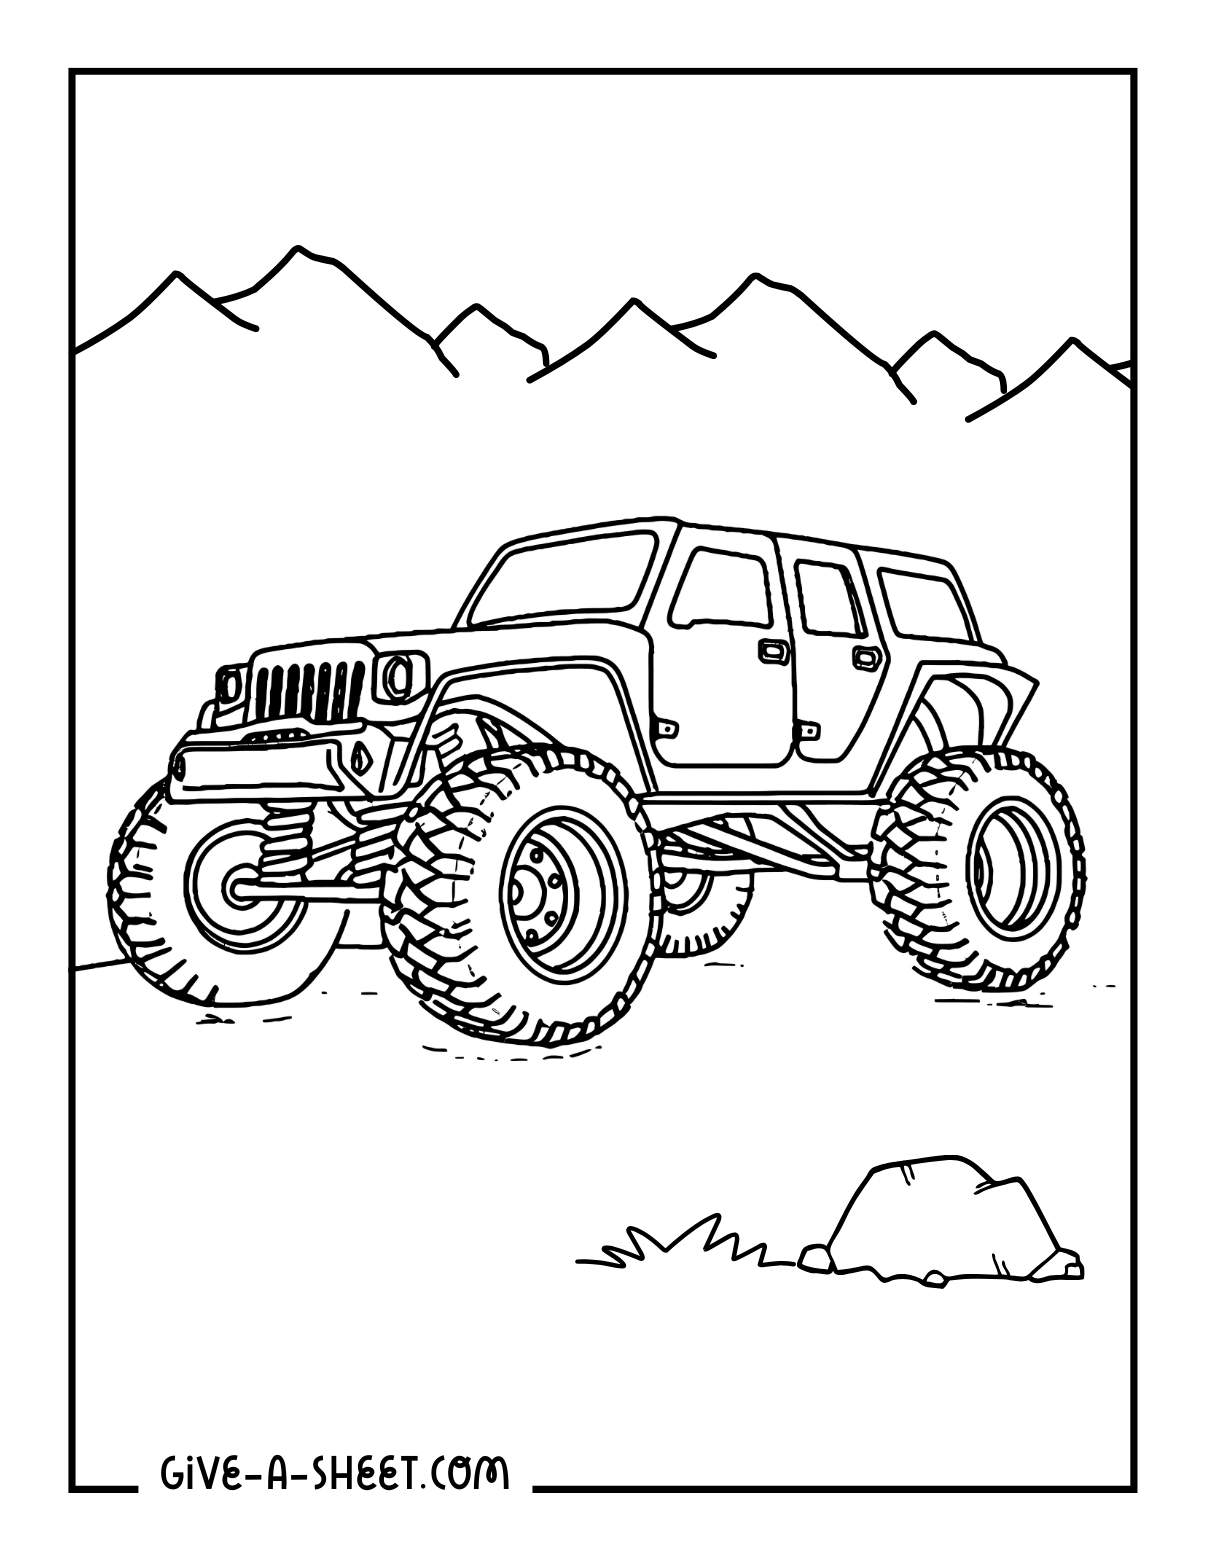 Monster truck coloring page with hug tires.